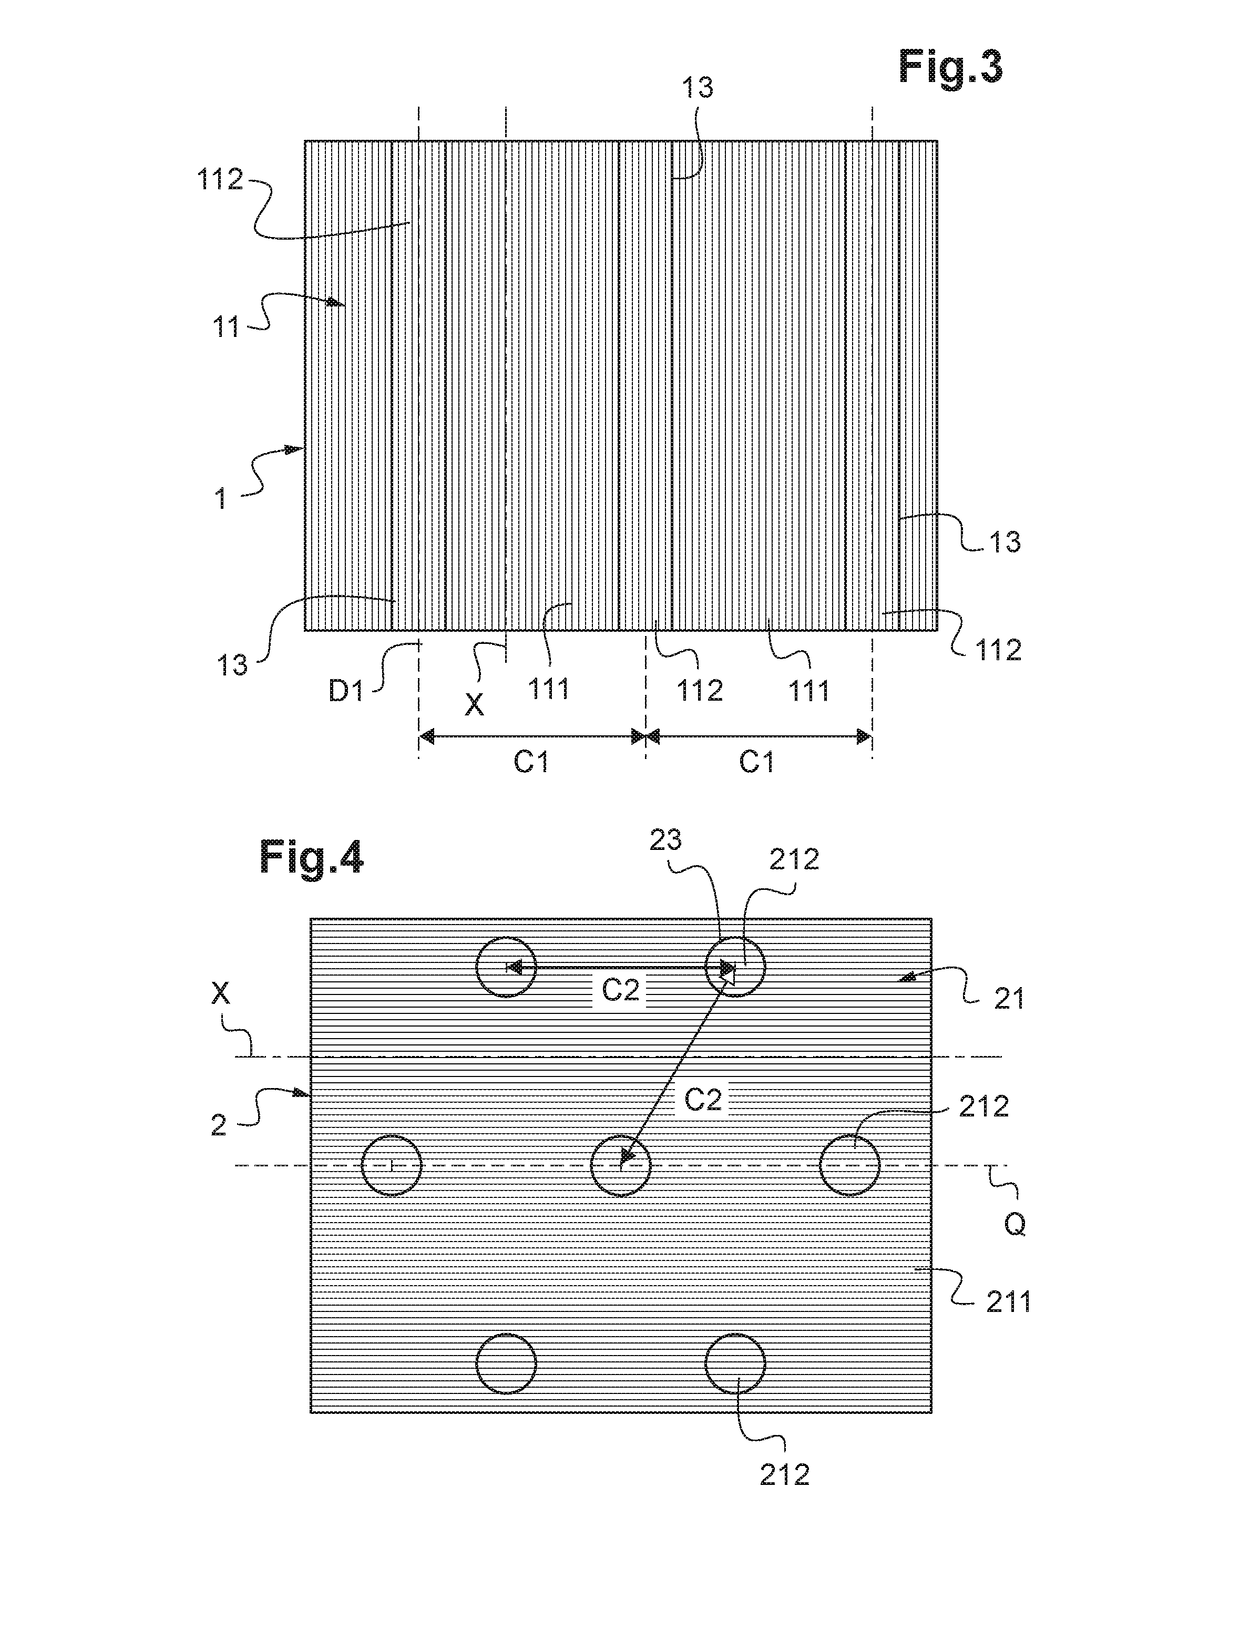 Thin-film alignment layer provided with integrally-formed spacing structures and forming an intermediate layer for an optical article comprising liquid crystals